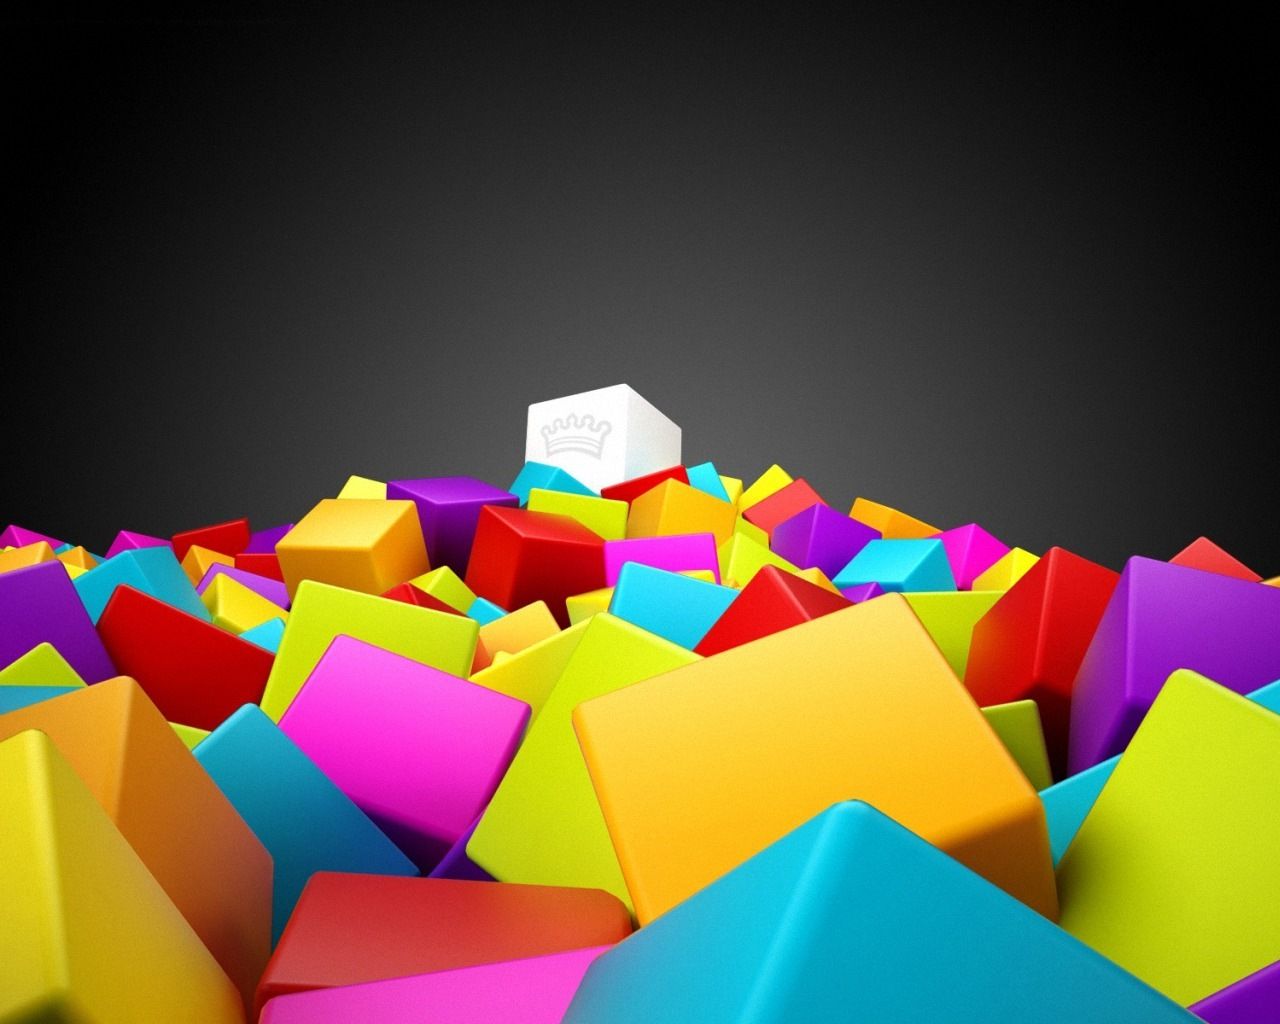 3d Colorful Squares 1280x1024 Wallpapers, 1280x1024 Wallpapers ...